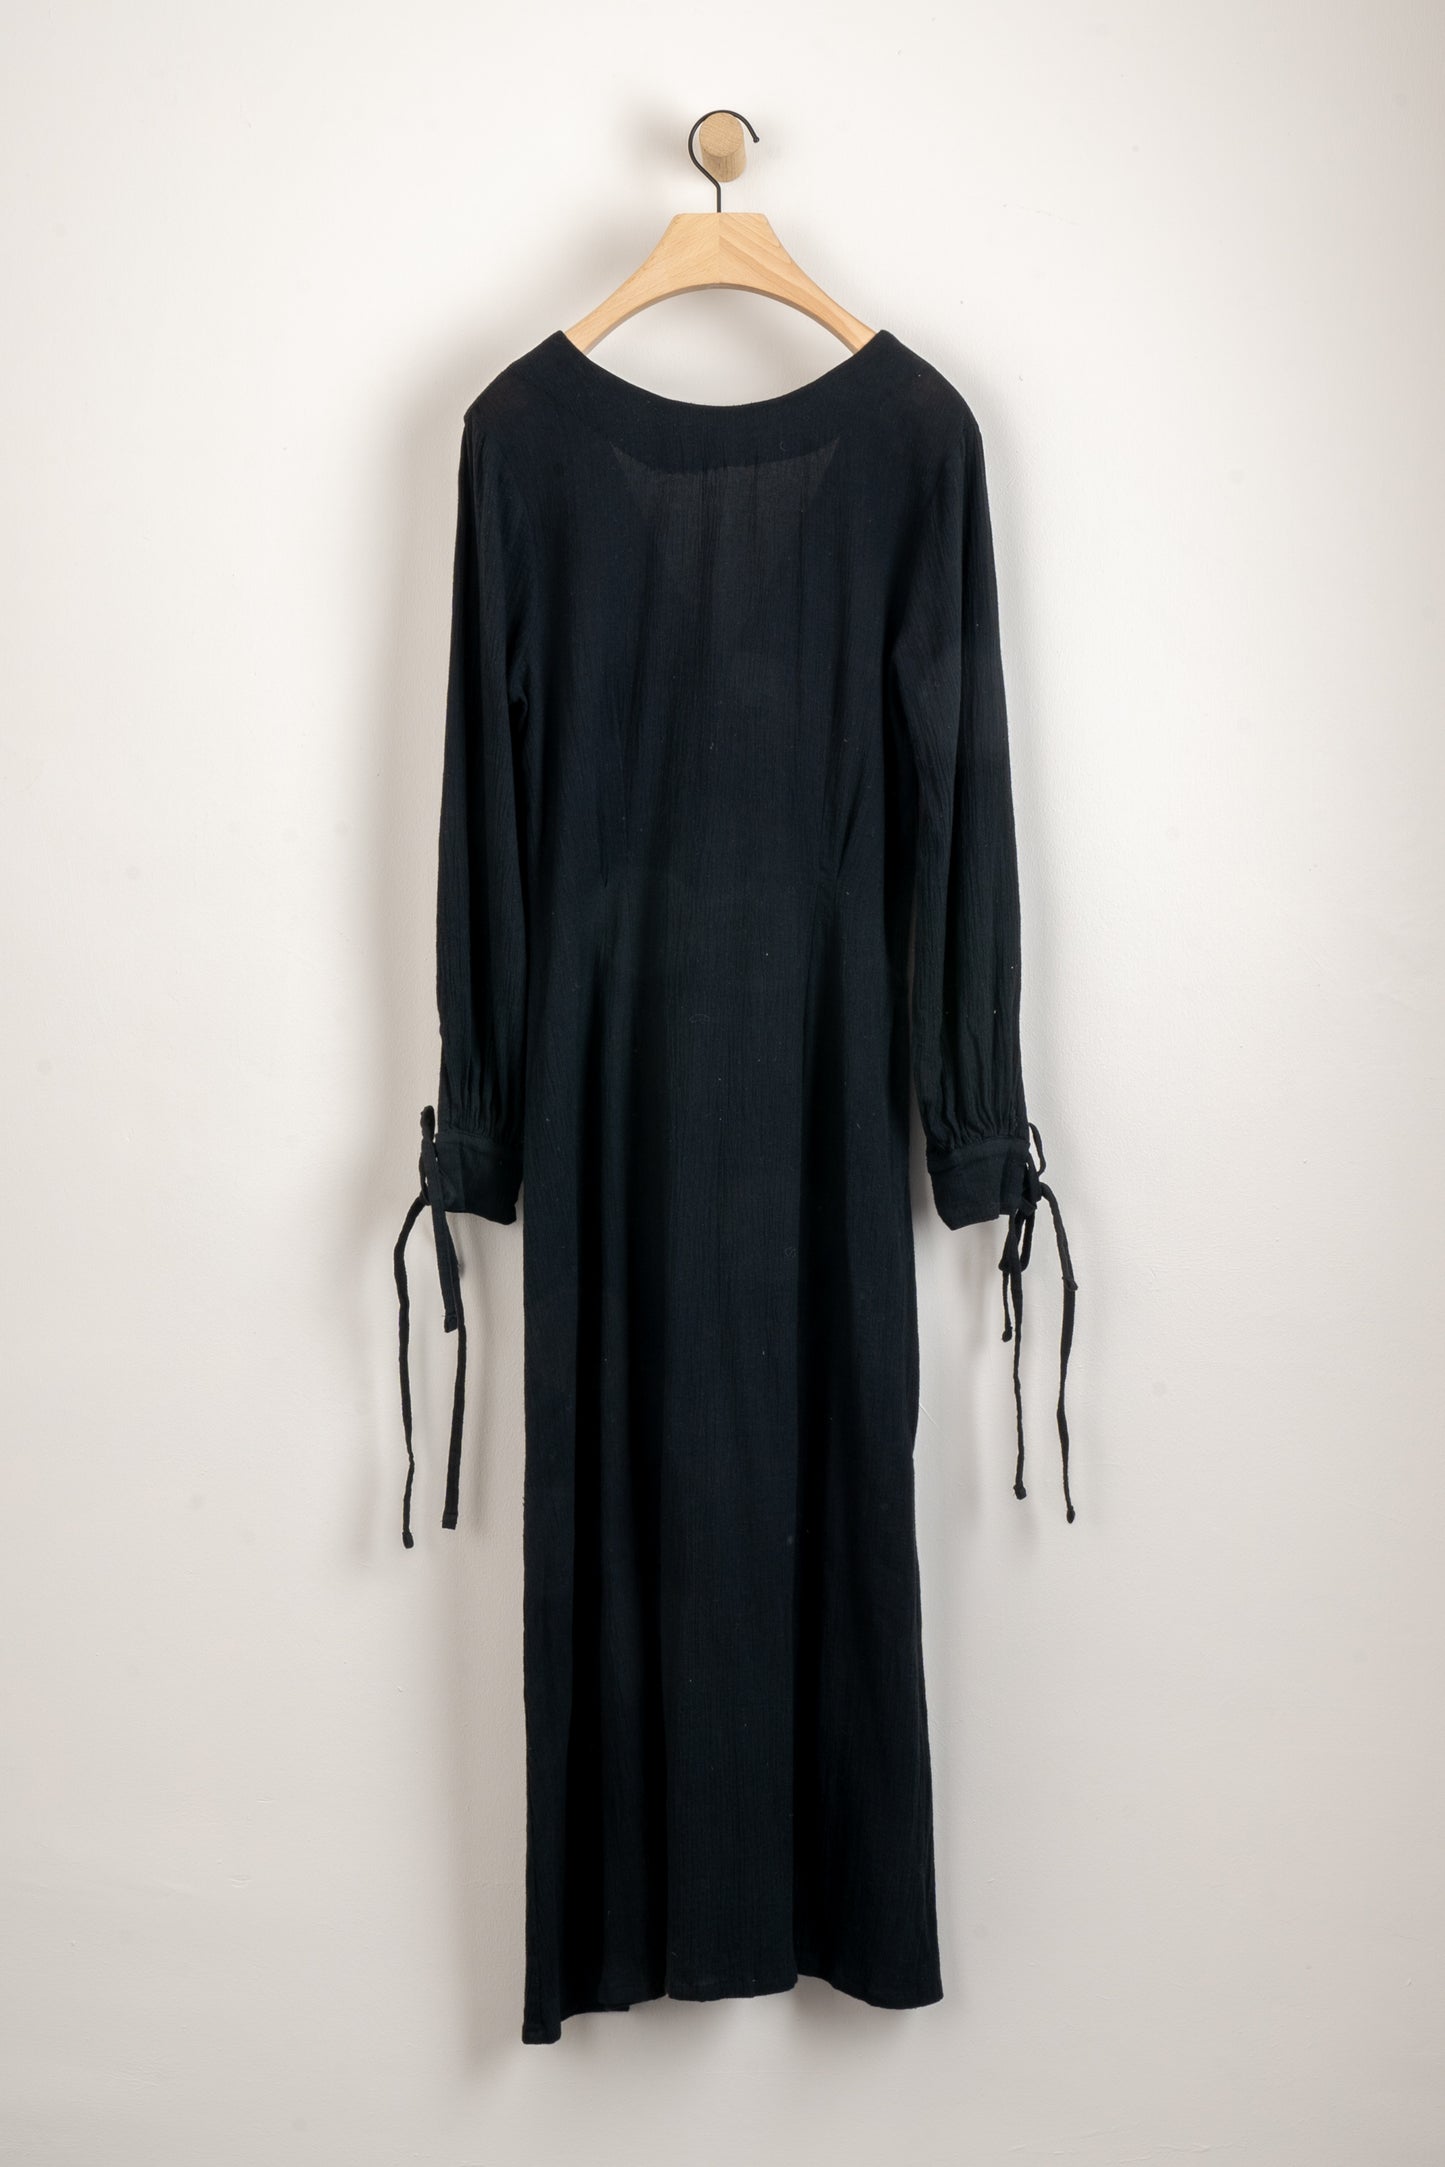 Curate & Rotate Bug Clothing Black Dress